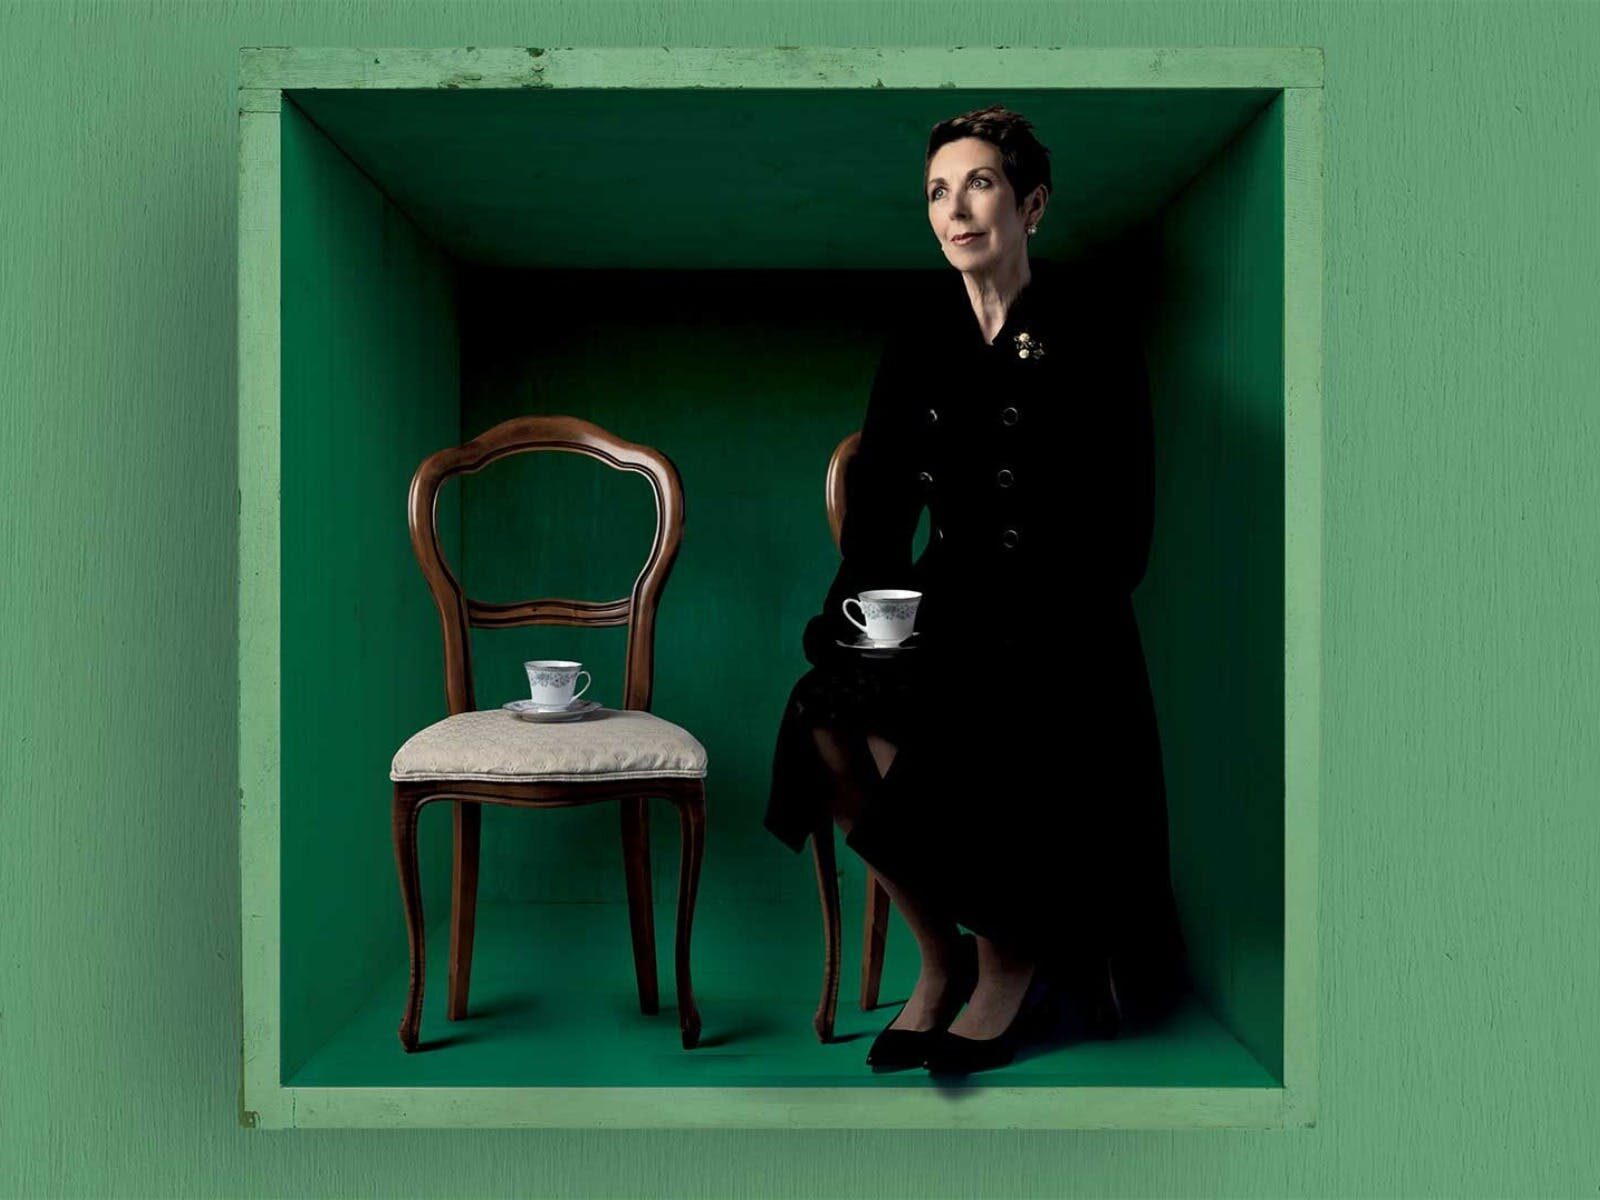 A woman sitting in a green box, savouring a cup of tea.